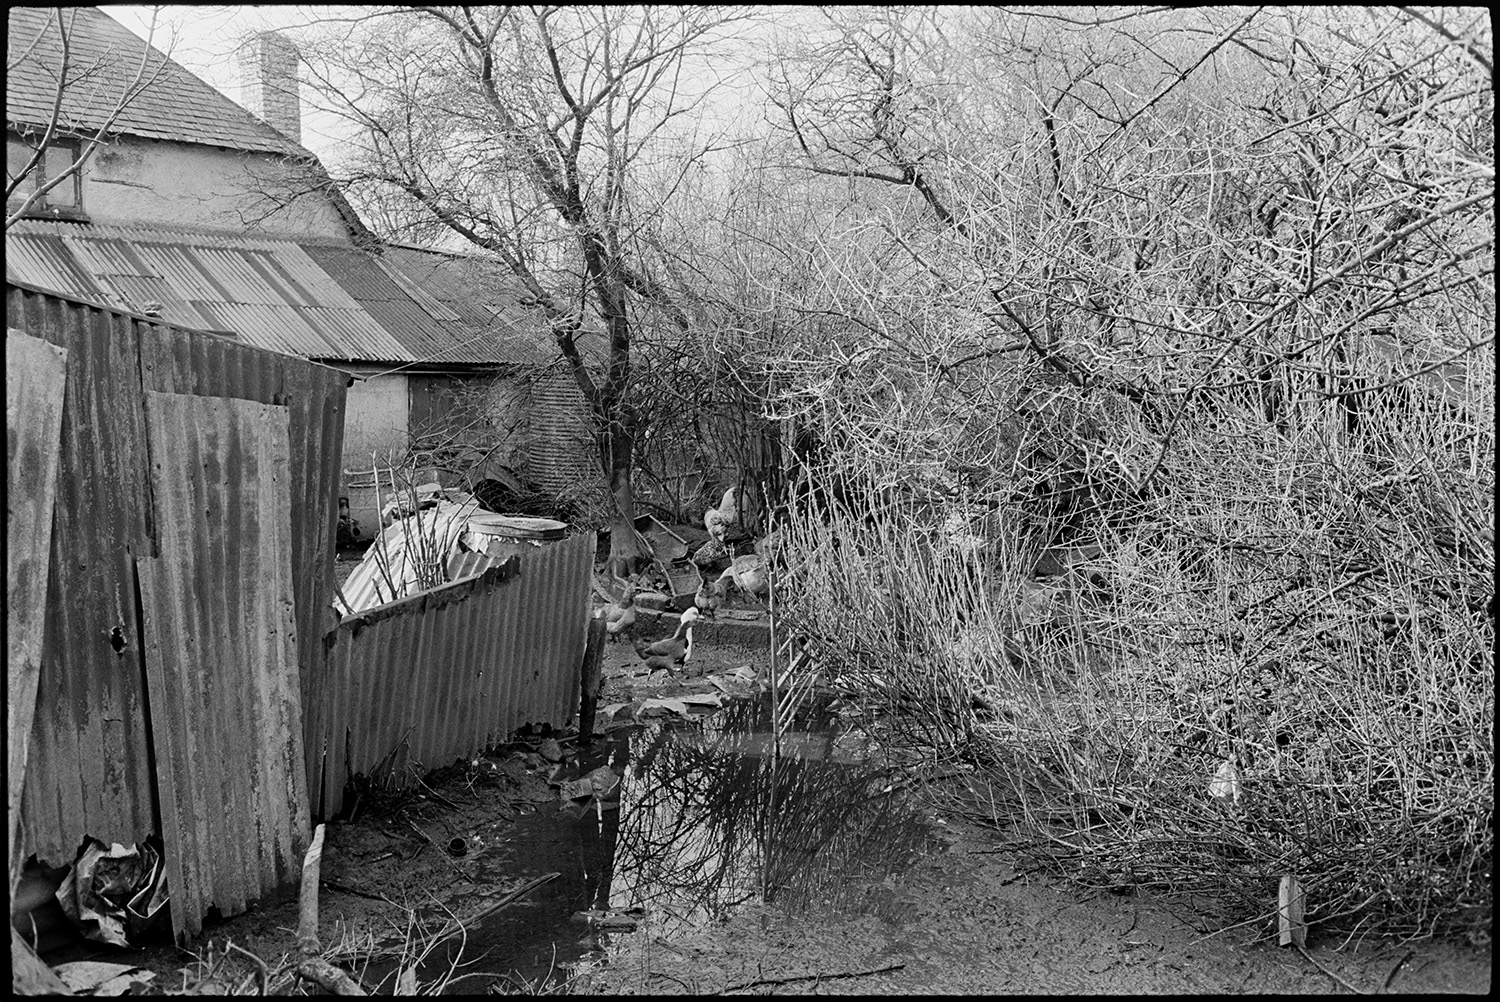 Mucky farmyard, geese, cows, mud, snowdrops in old orchard, tractor.
[Muddy and waterlogged farmyard at Cuppers Piece, Beaford. Muscovy duck and chickens, corrugated iron sheds, an overgrown hedge and a farmhouse can be seen.]